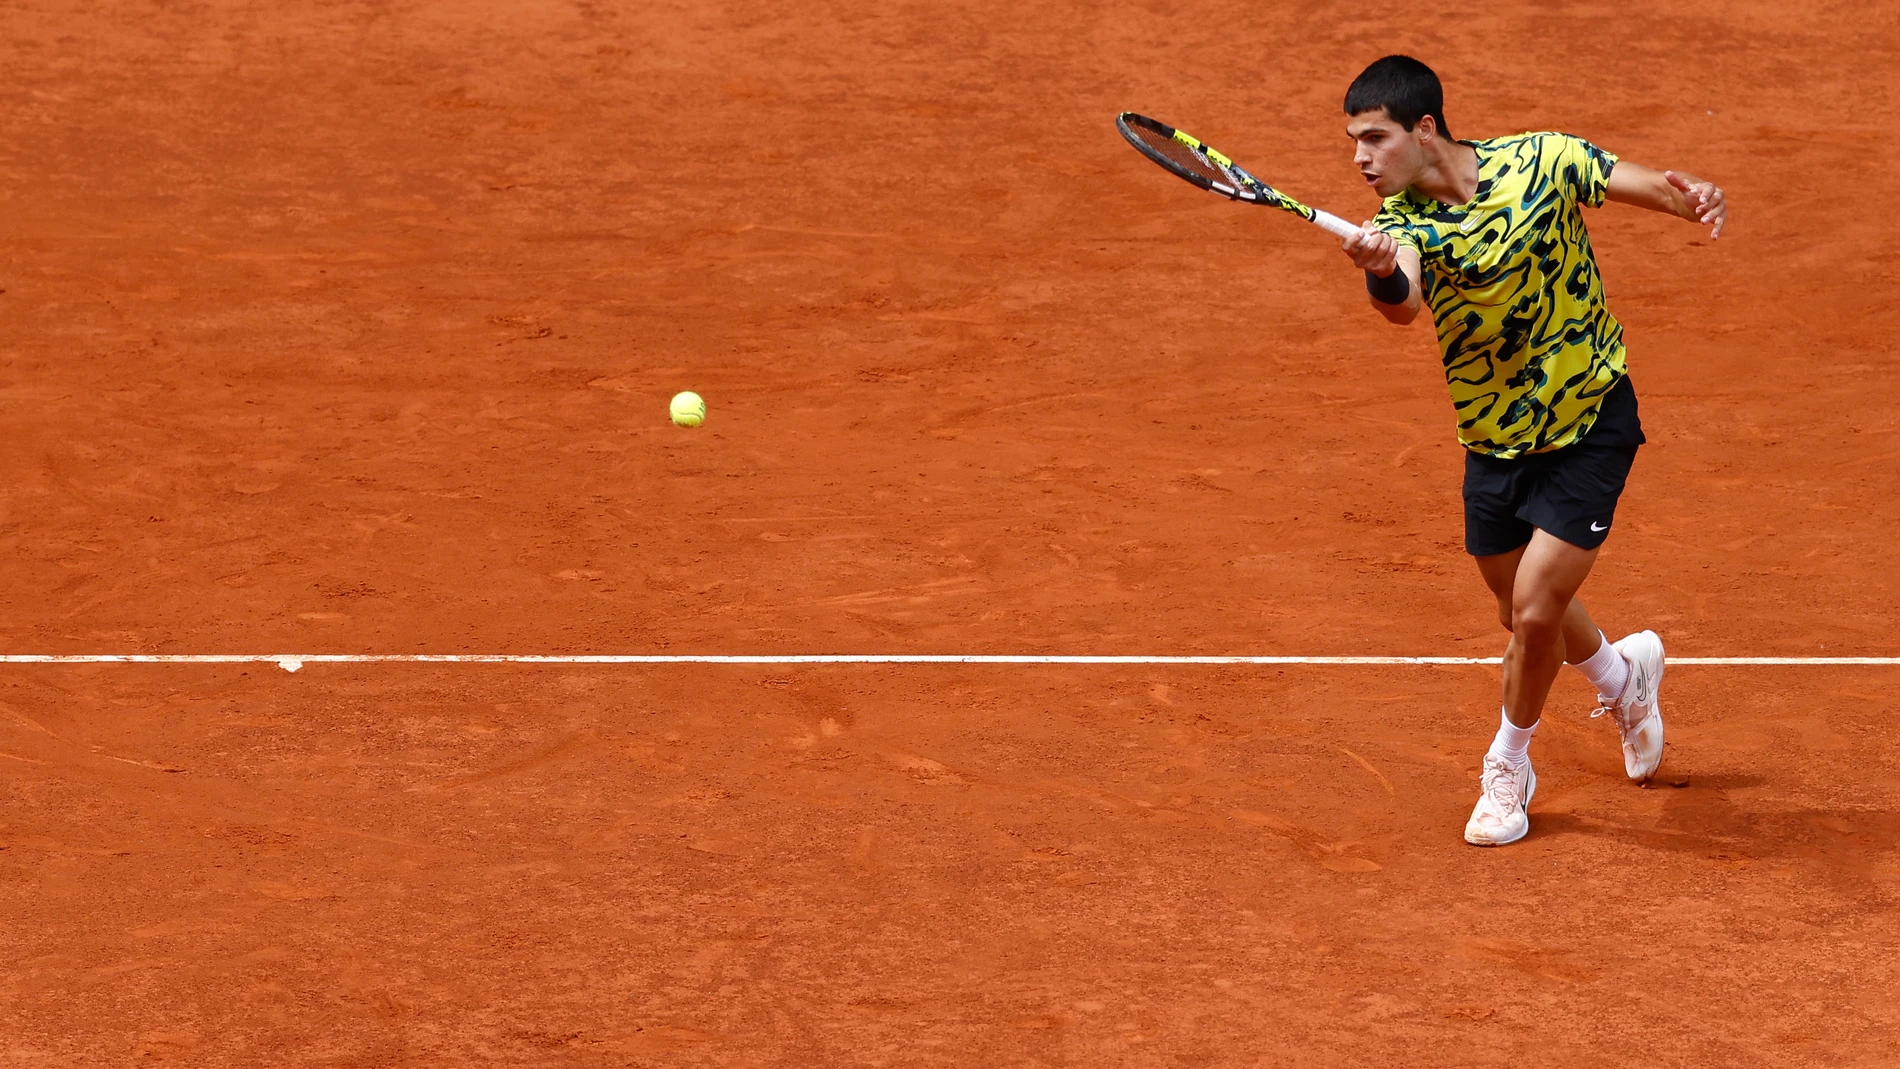 Carlos Alcaraz of Spain in action against Karen Khachanov of Russia during the Mutua Madrid Open 2023 celebrated at Caja Magica on May 03, 2023 in Madrid, Spain.
Oscar J. Barroso / Afp7 
03/05/2023 ONLY FOR USE IN SPAIN